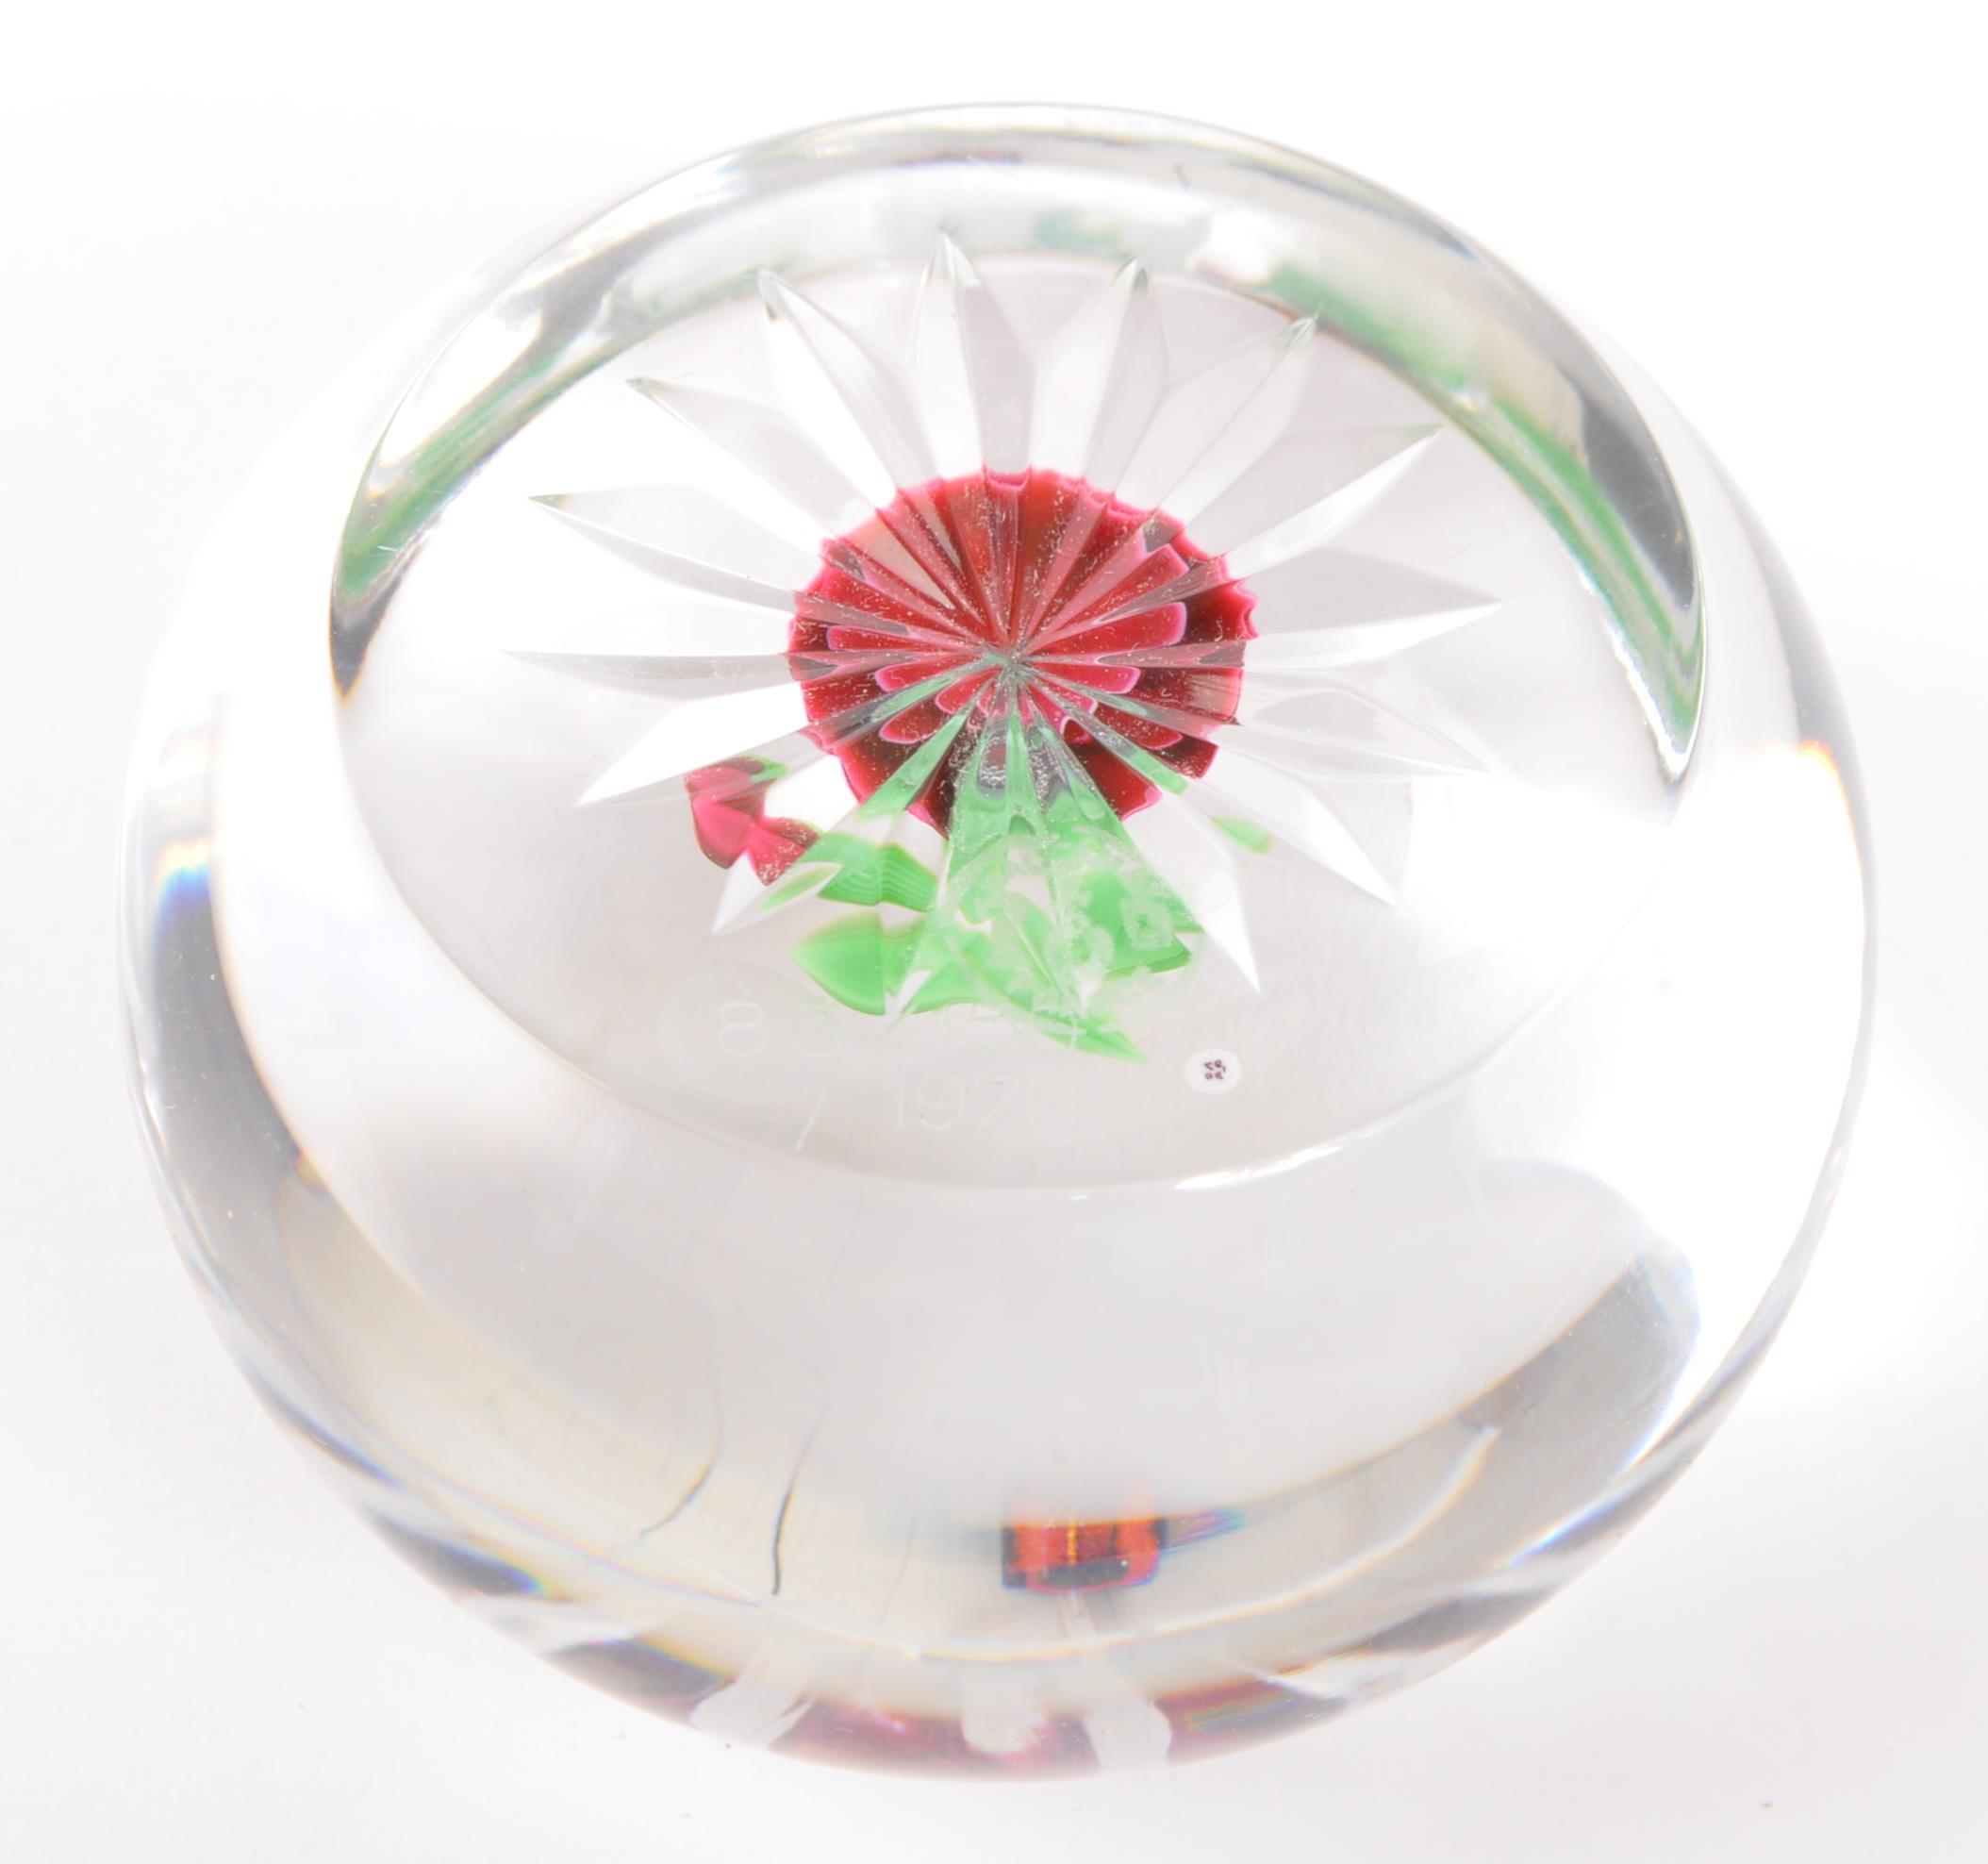 1976 BACCARAT FRENCH GLASS LAMPWORK ROSE PAPERWEIGHT - Image 6 of 7